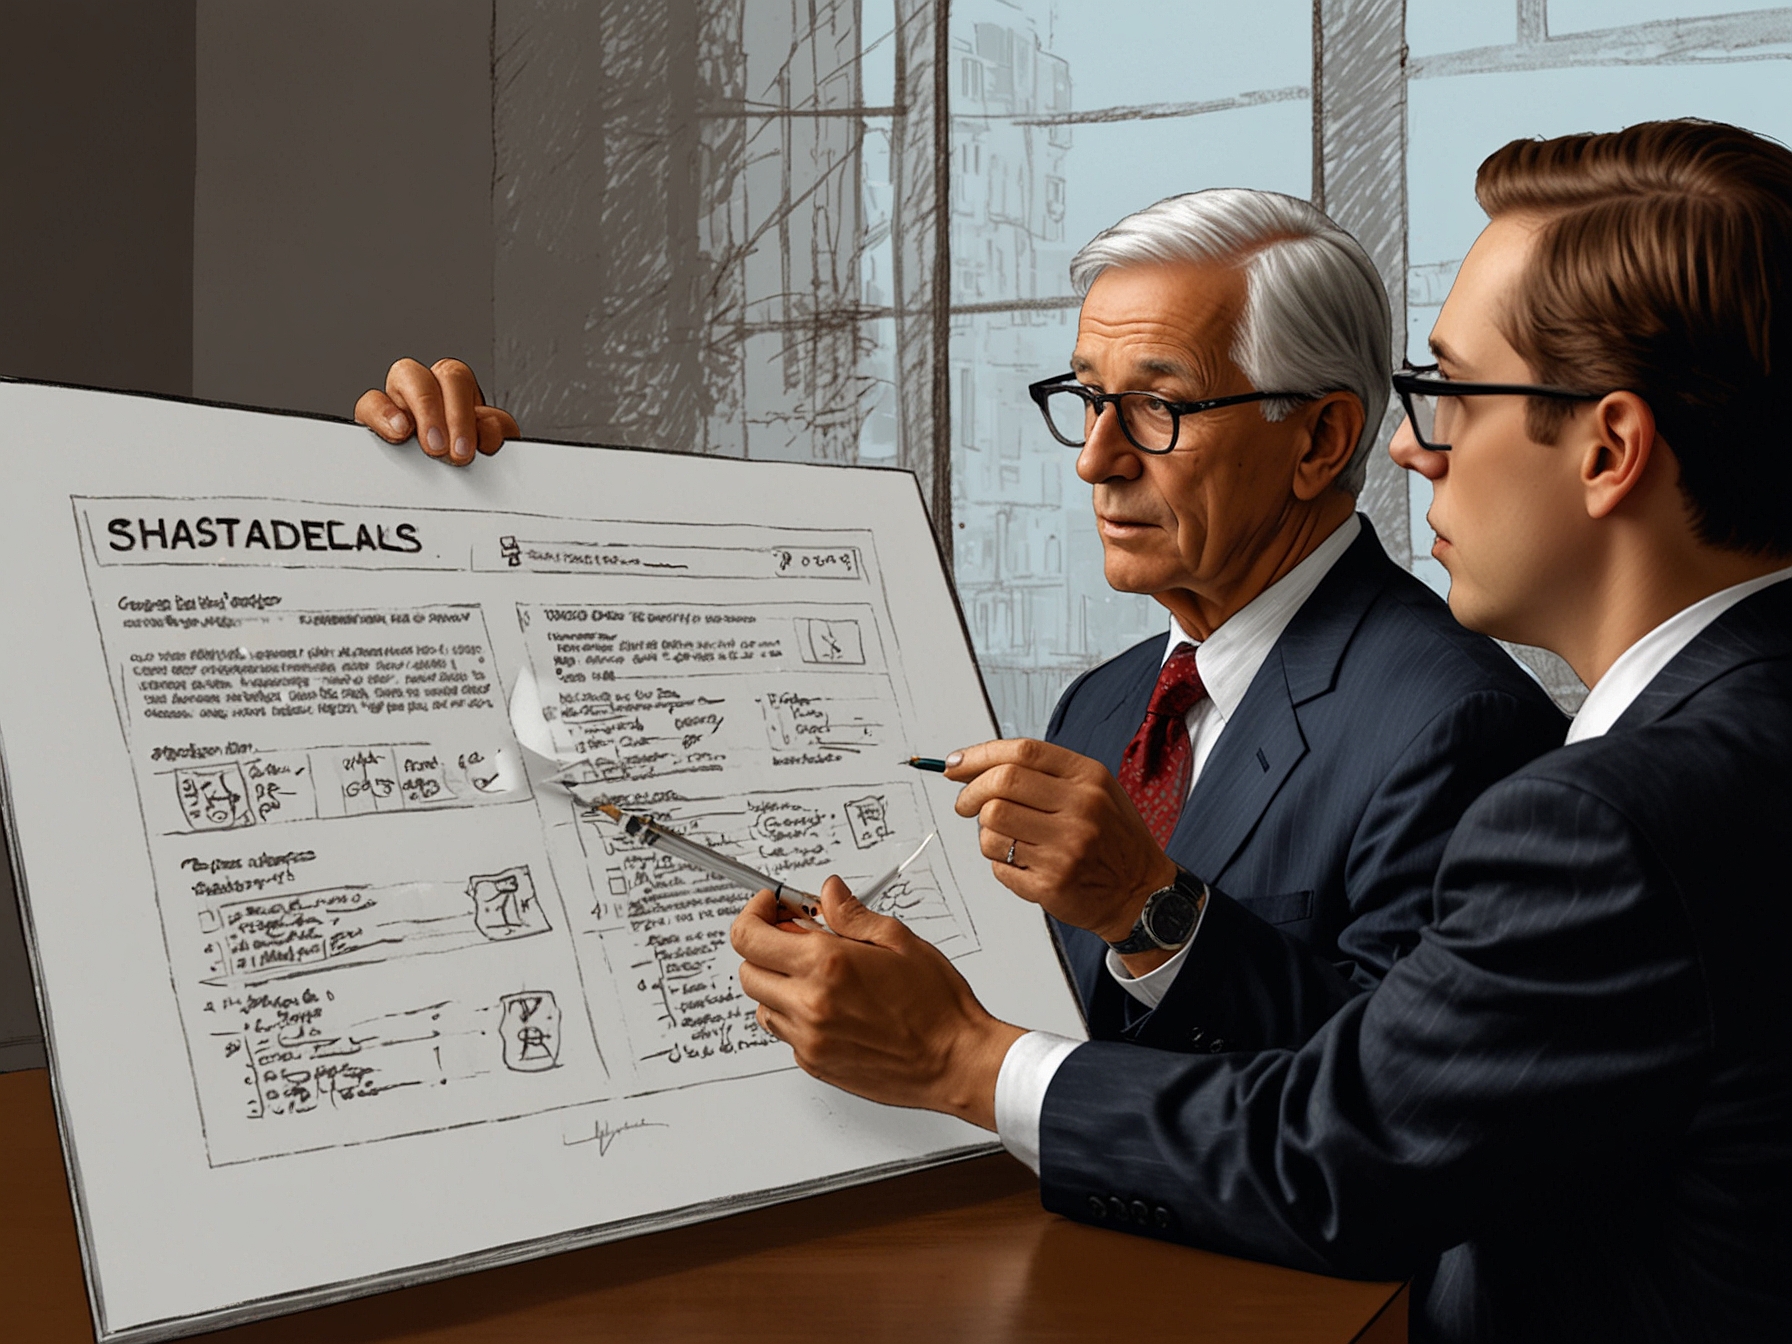 Shareholders reviewing the Section 19(a) notice with a financial advisor, highlighting the importance of understanding the distribution components for accurate financial planning and tax reporting.